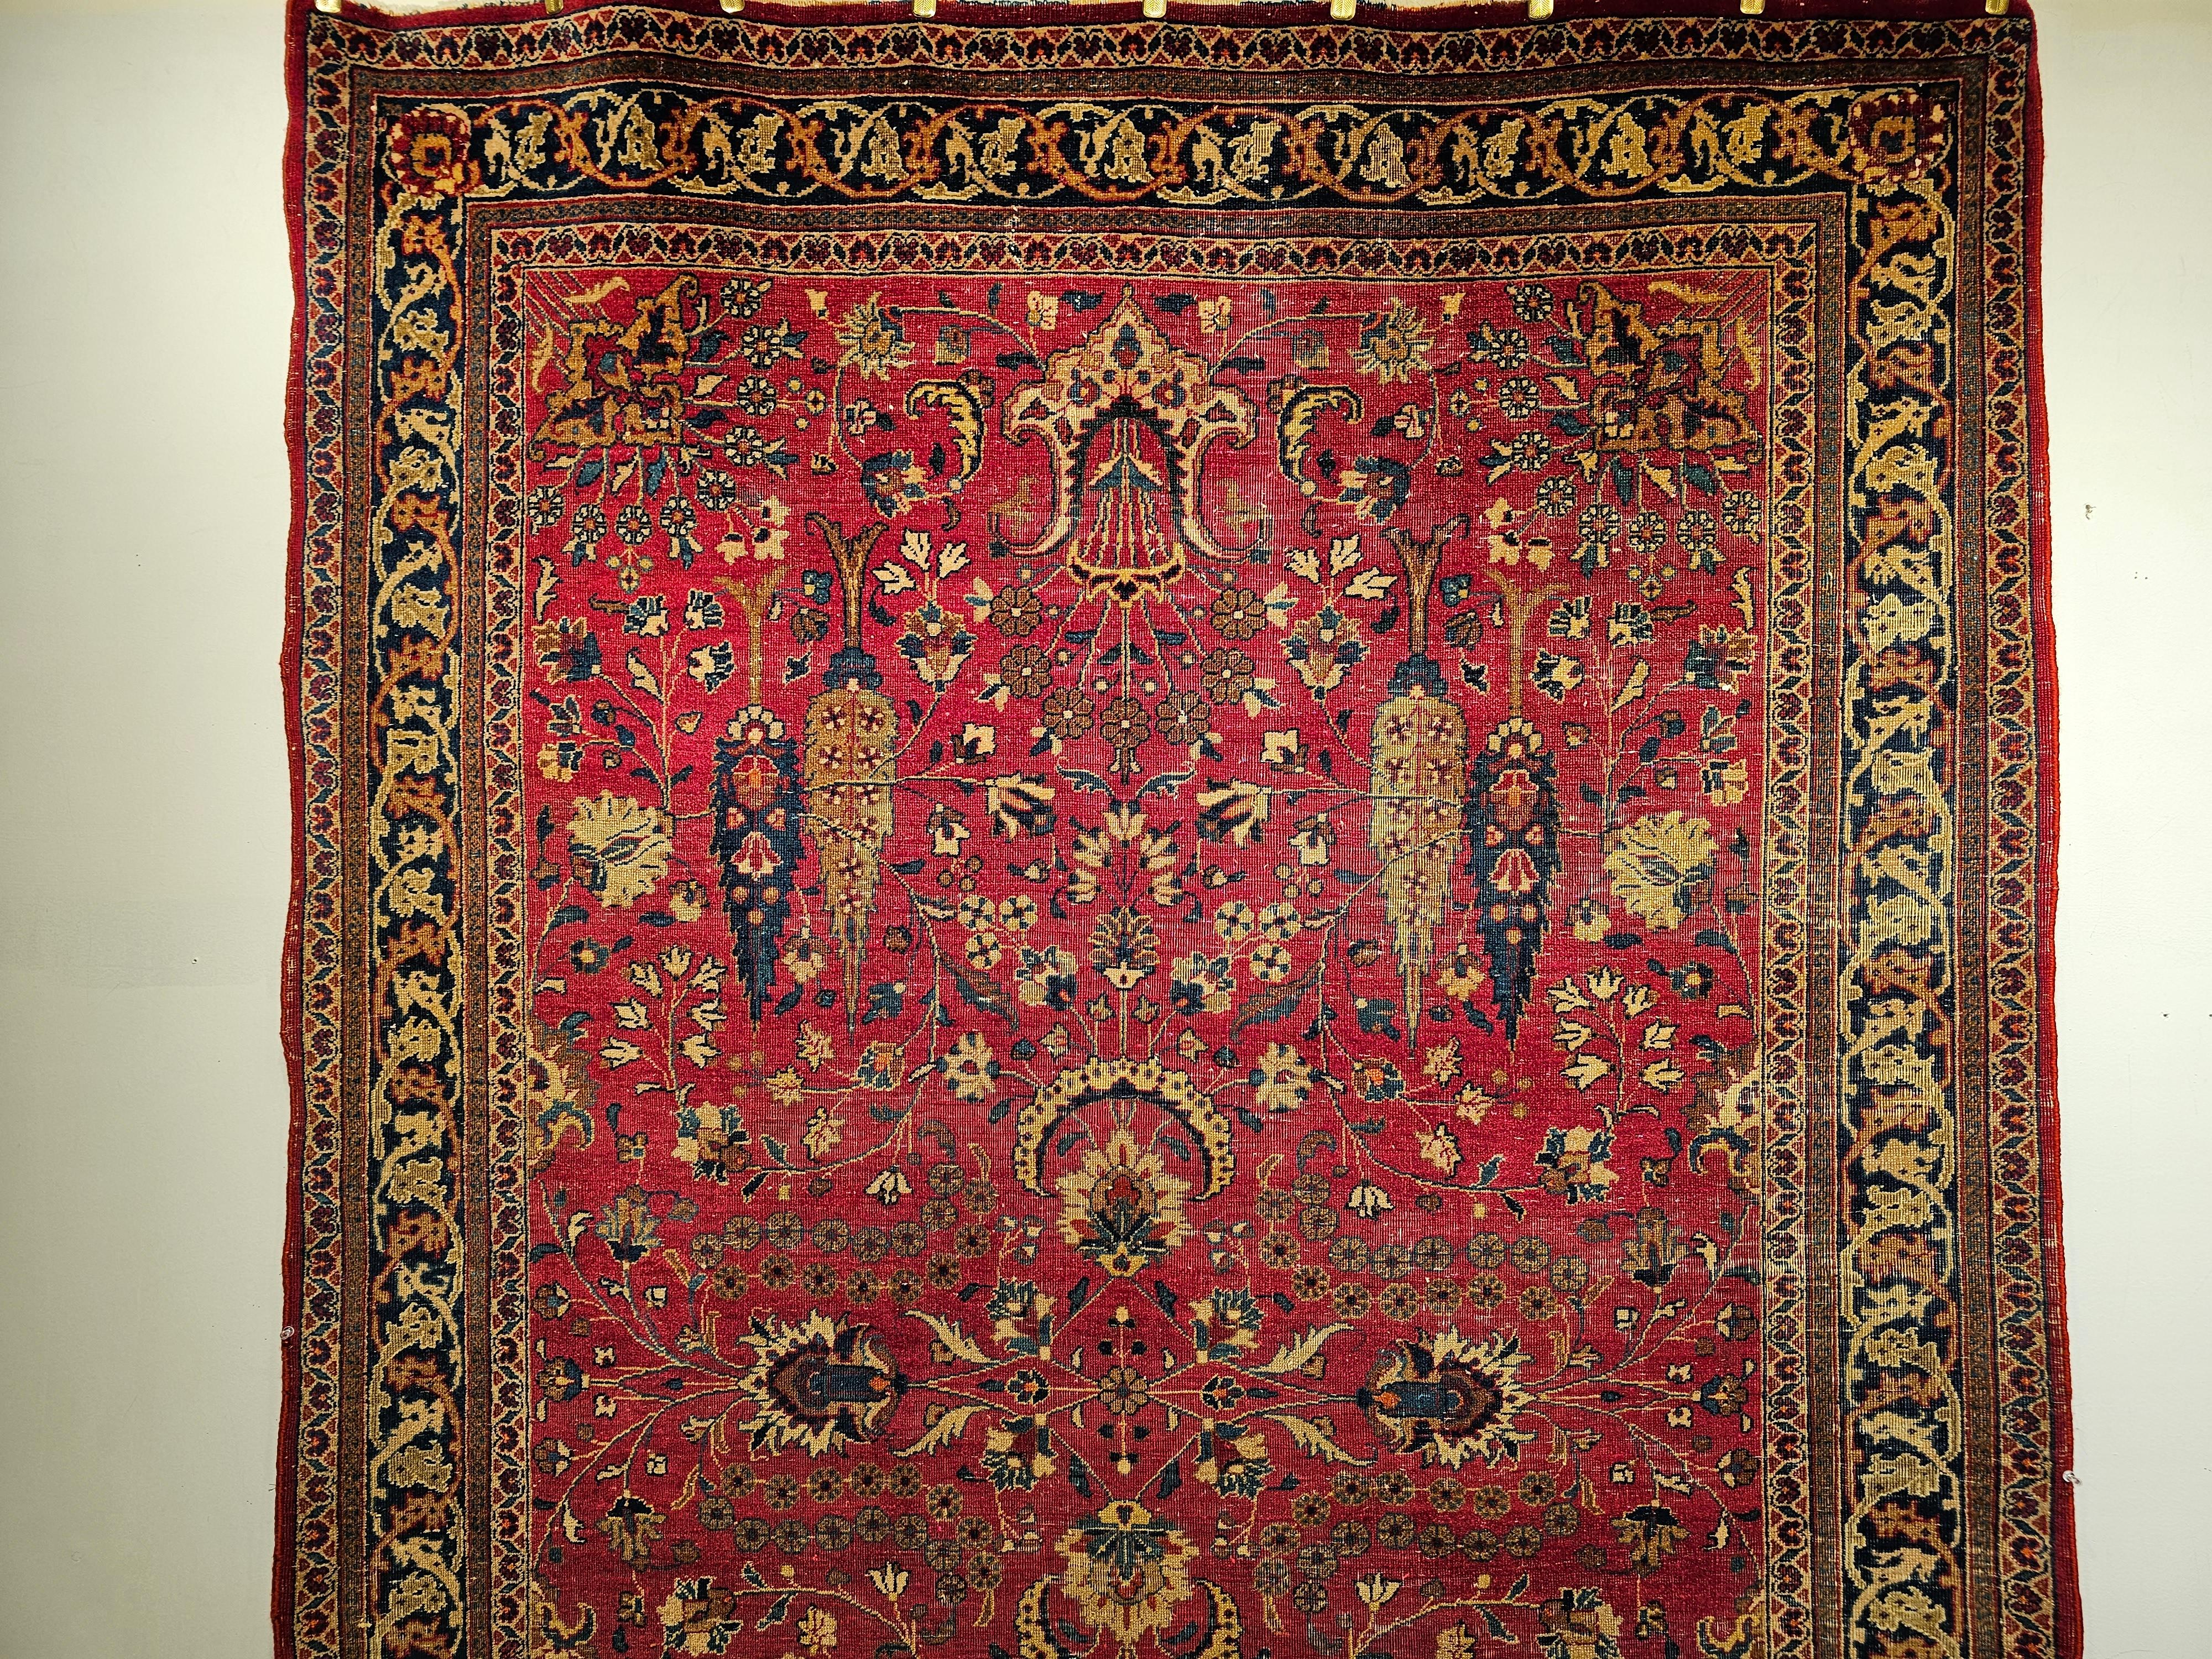 19th Century Persian Khorassan in allover floral design in crimson red, blue, and green.  It has one of the most unique colors and designs in any hand woven rugs from Persia. This Khorassan rug from NE Persia is from the last quarter of the 19th